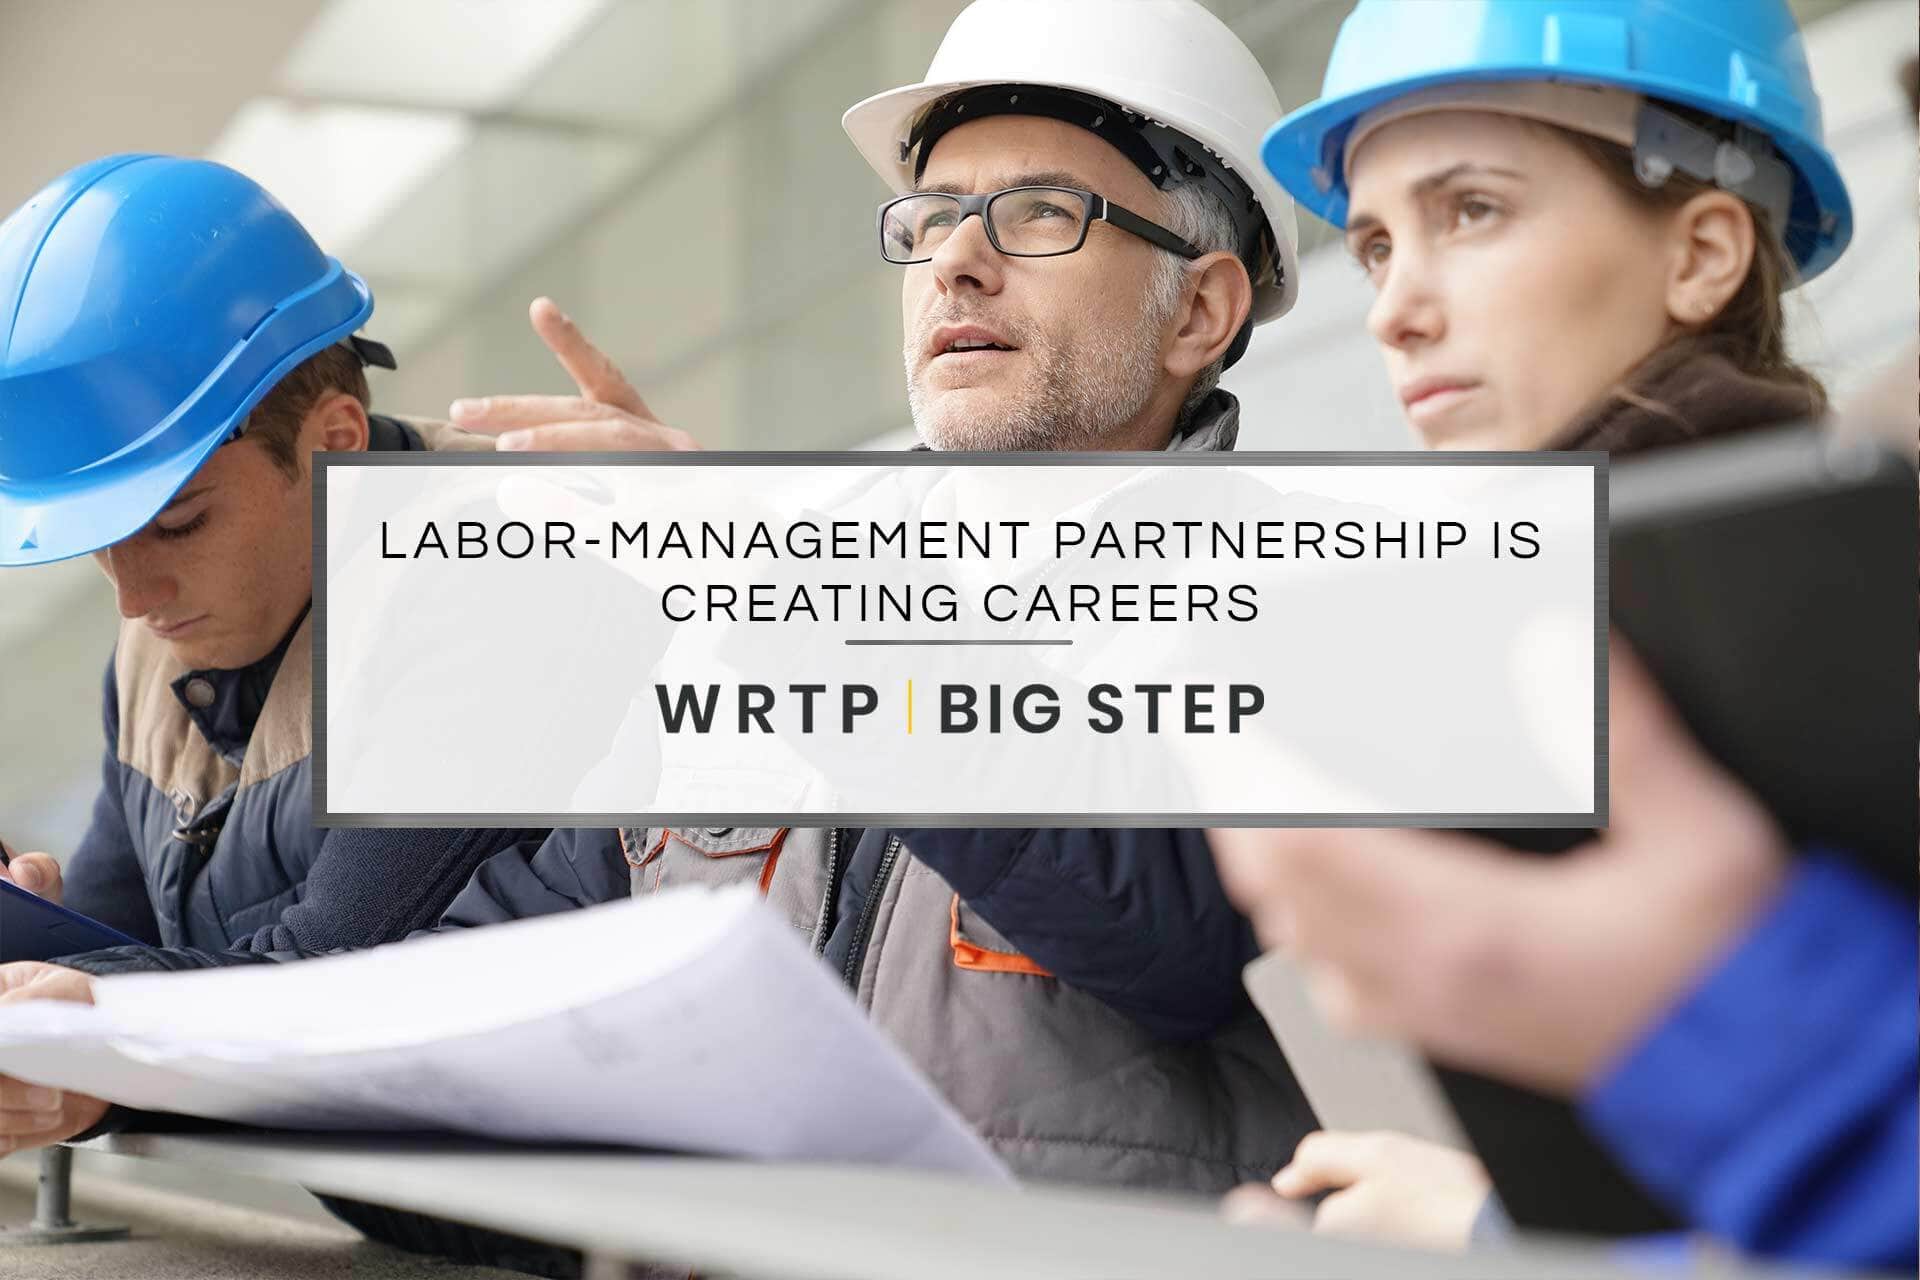 Labor-management partnership is creating careers